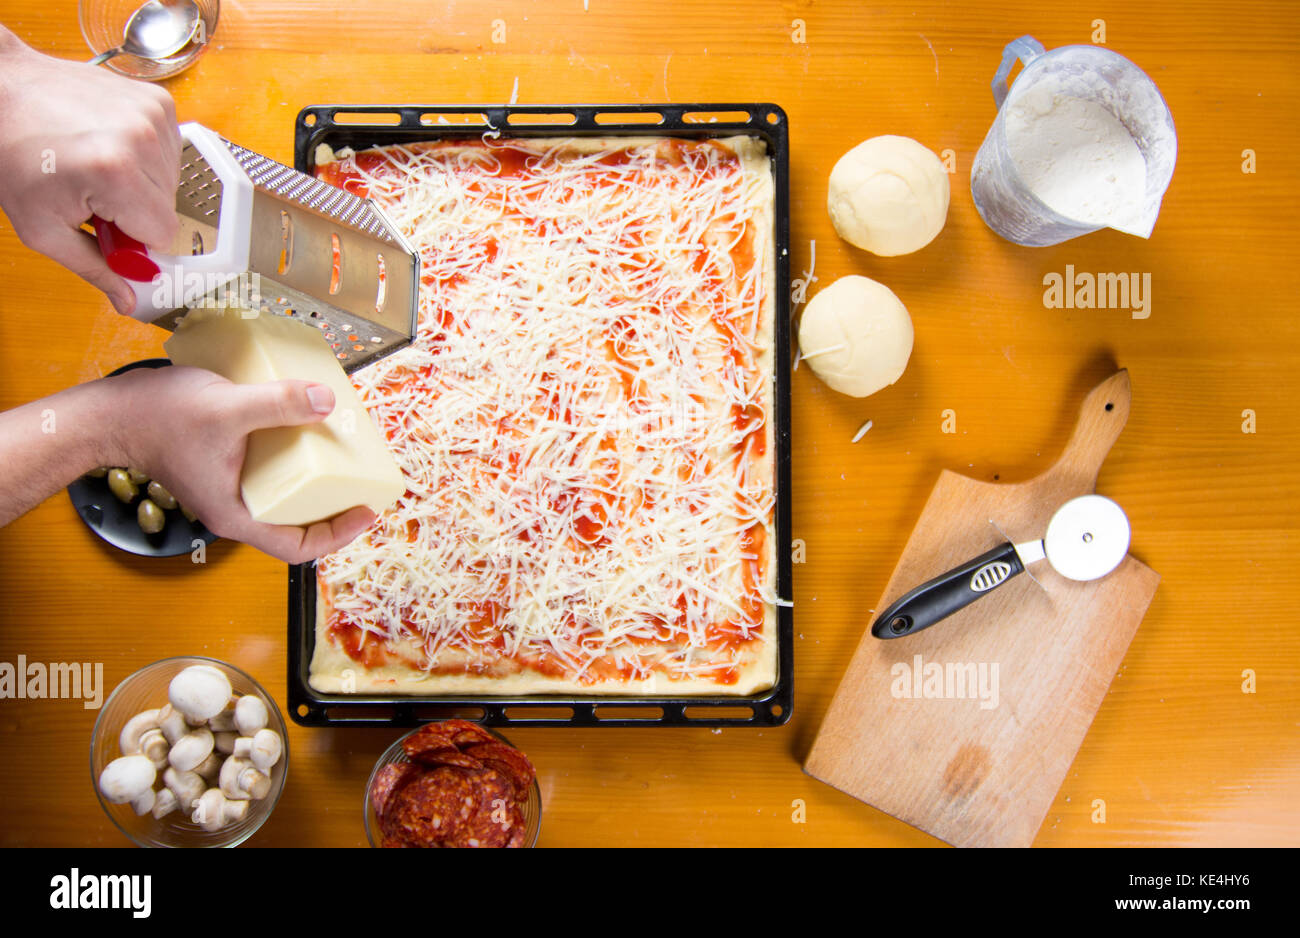 Man grating cheese on a pizza base. Making pizza Stock Photo